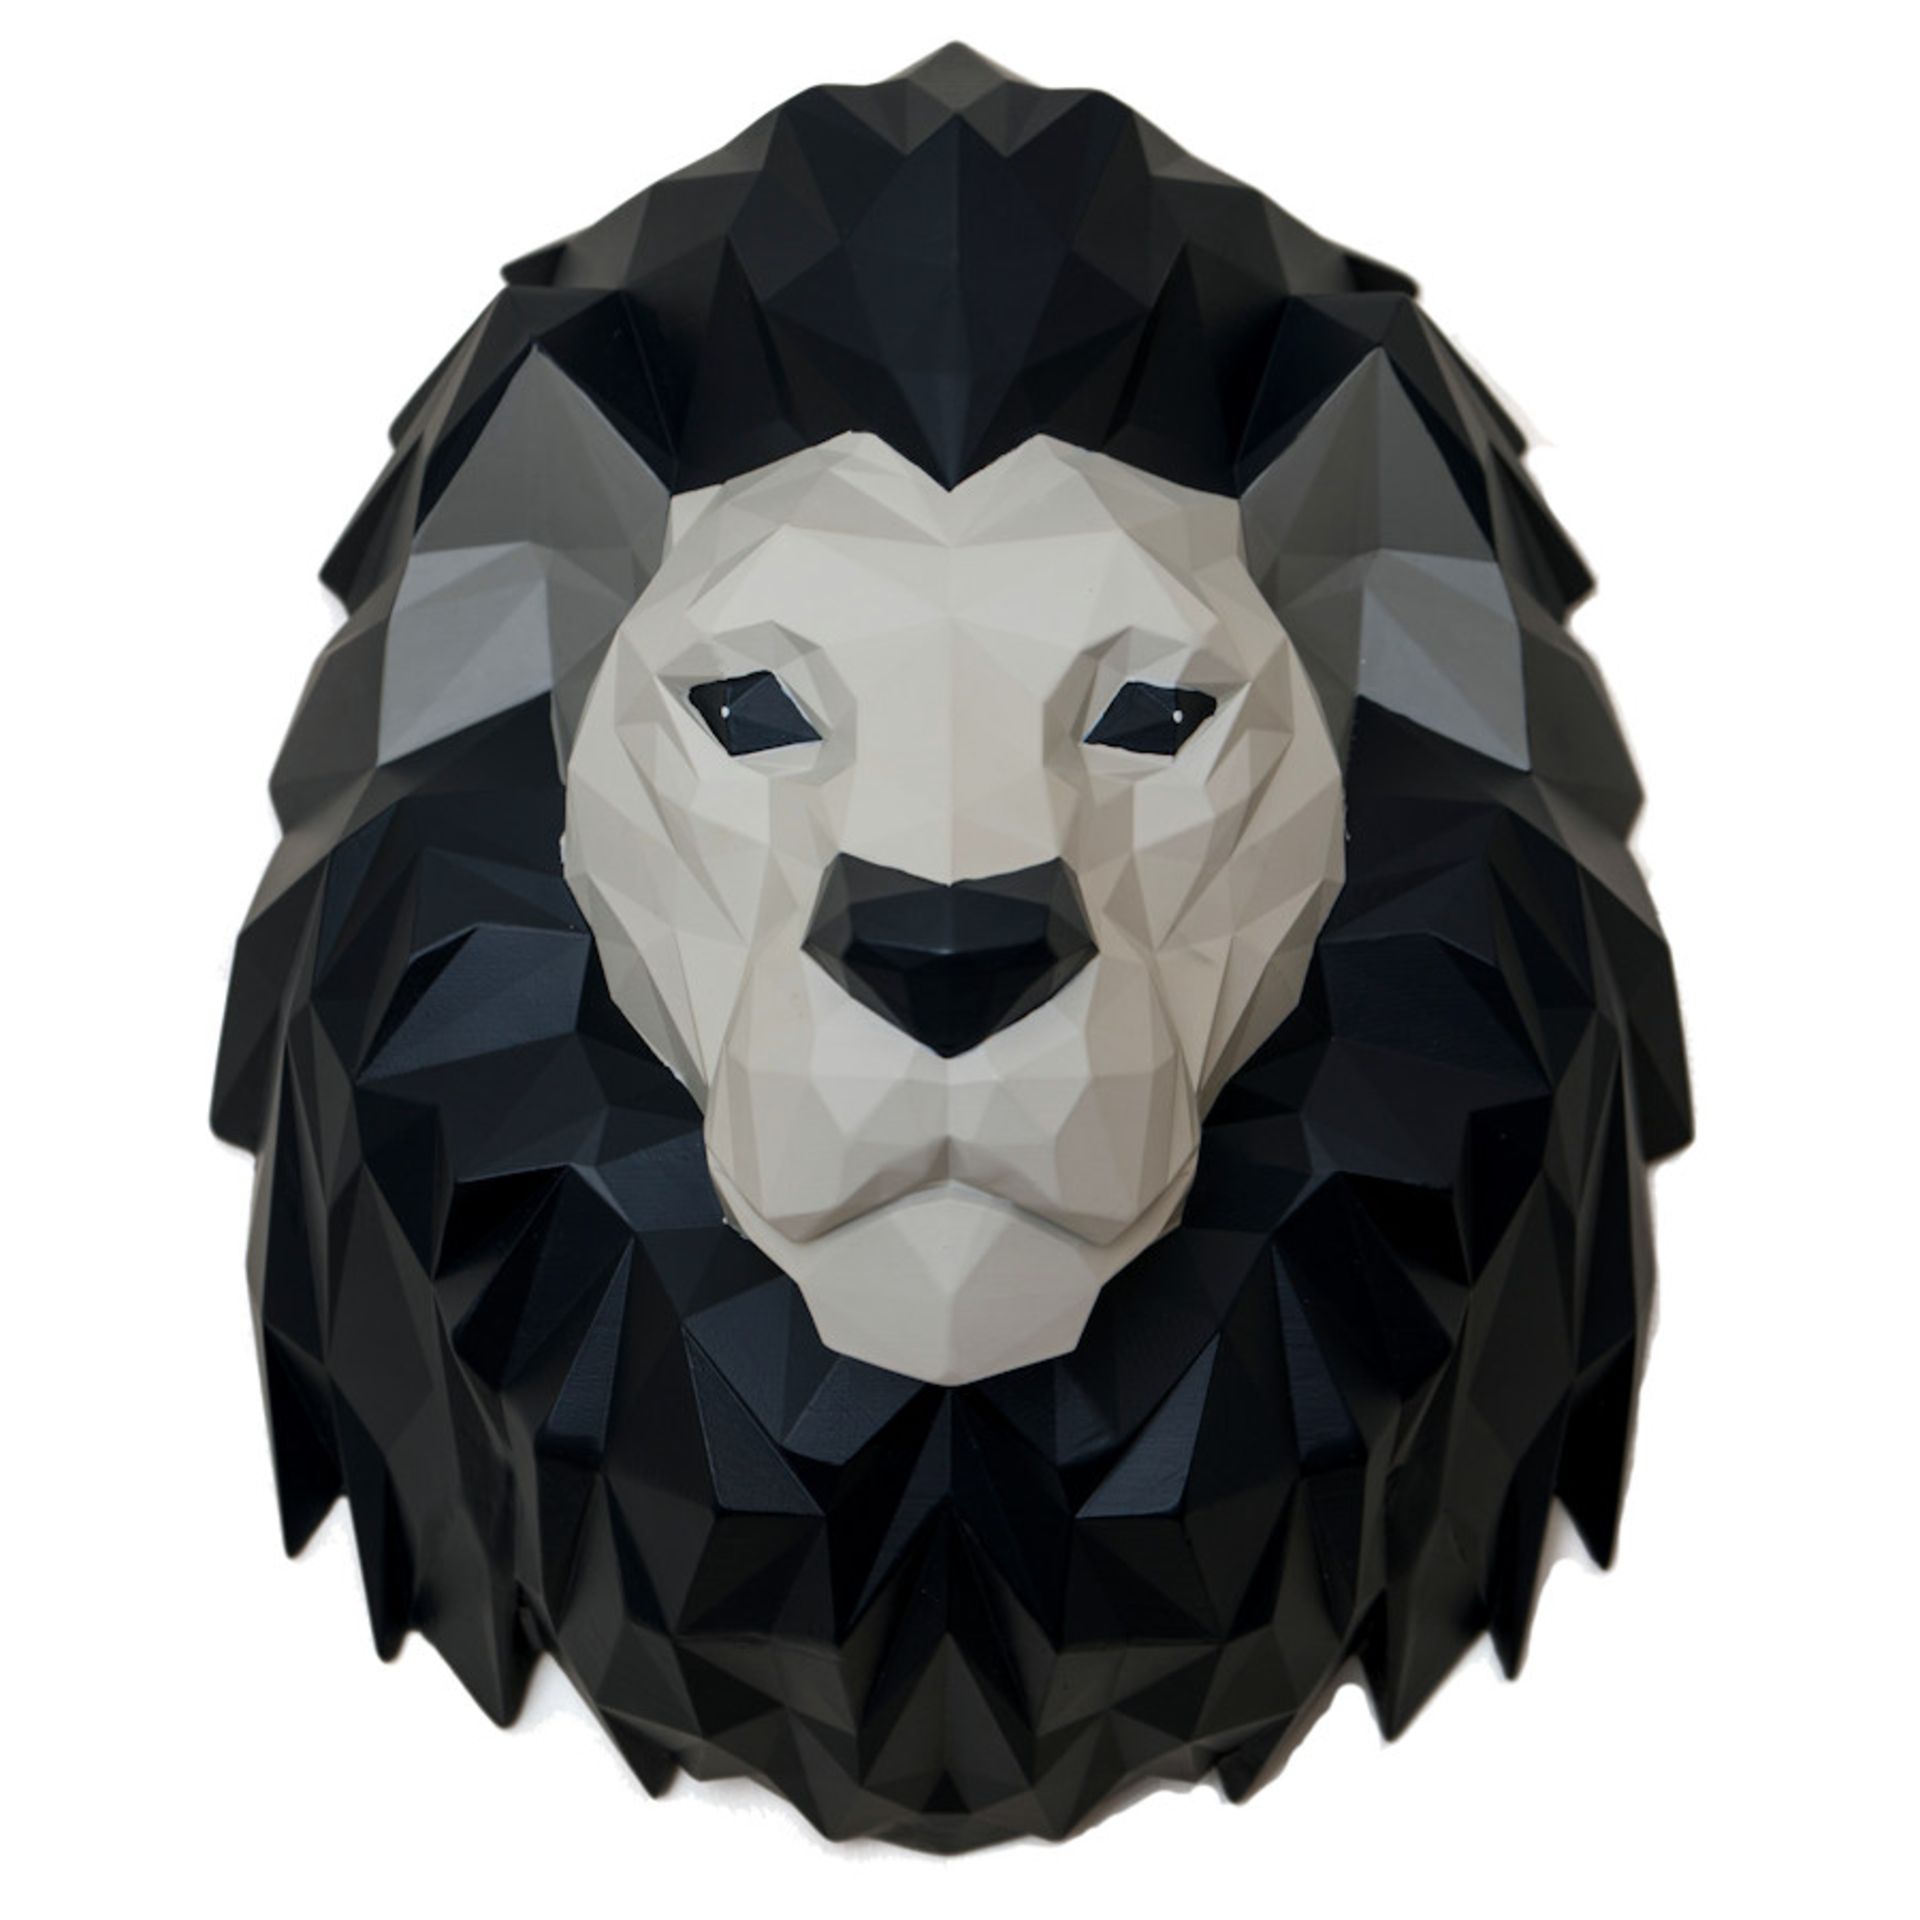 1 x Artistic Origami LION Head Abstract Wall Hanging - Brand New Boxed Stock - Image 3 of 3